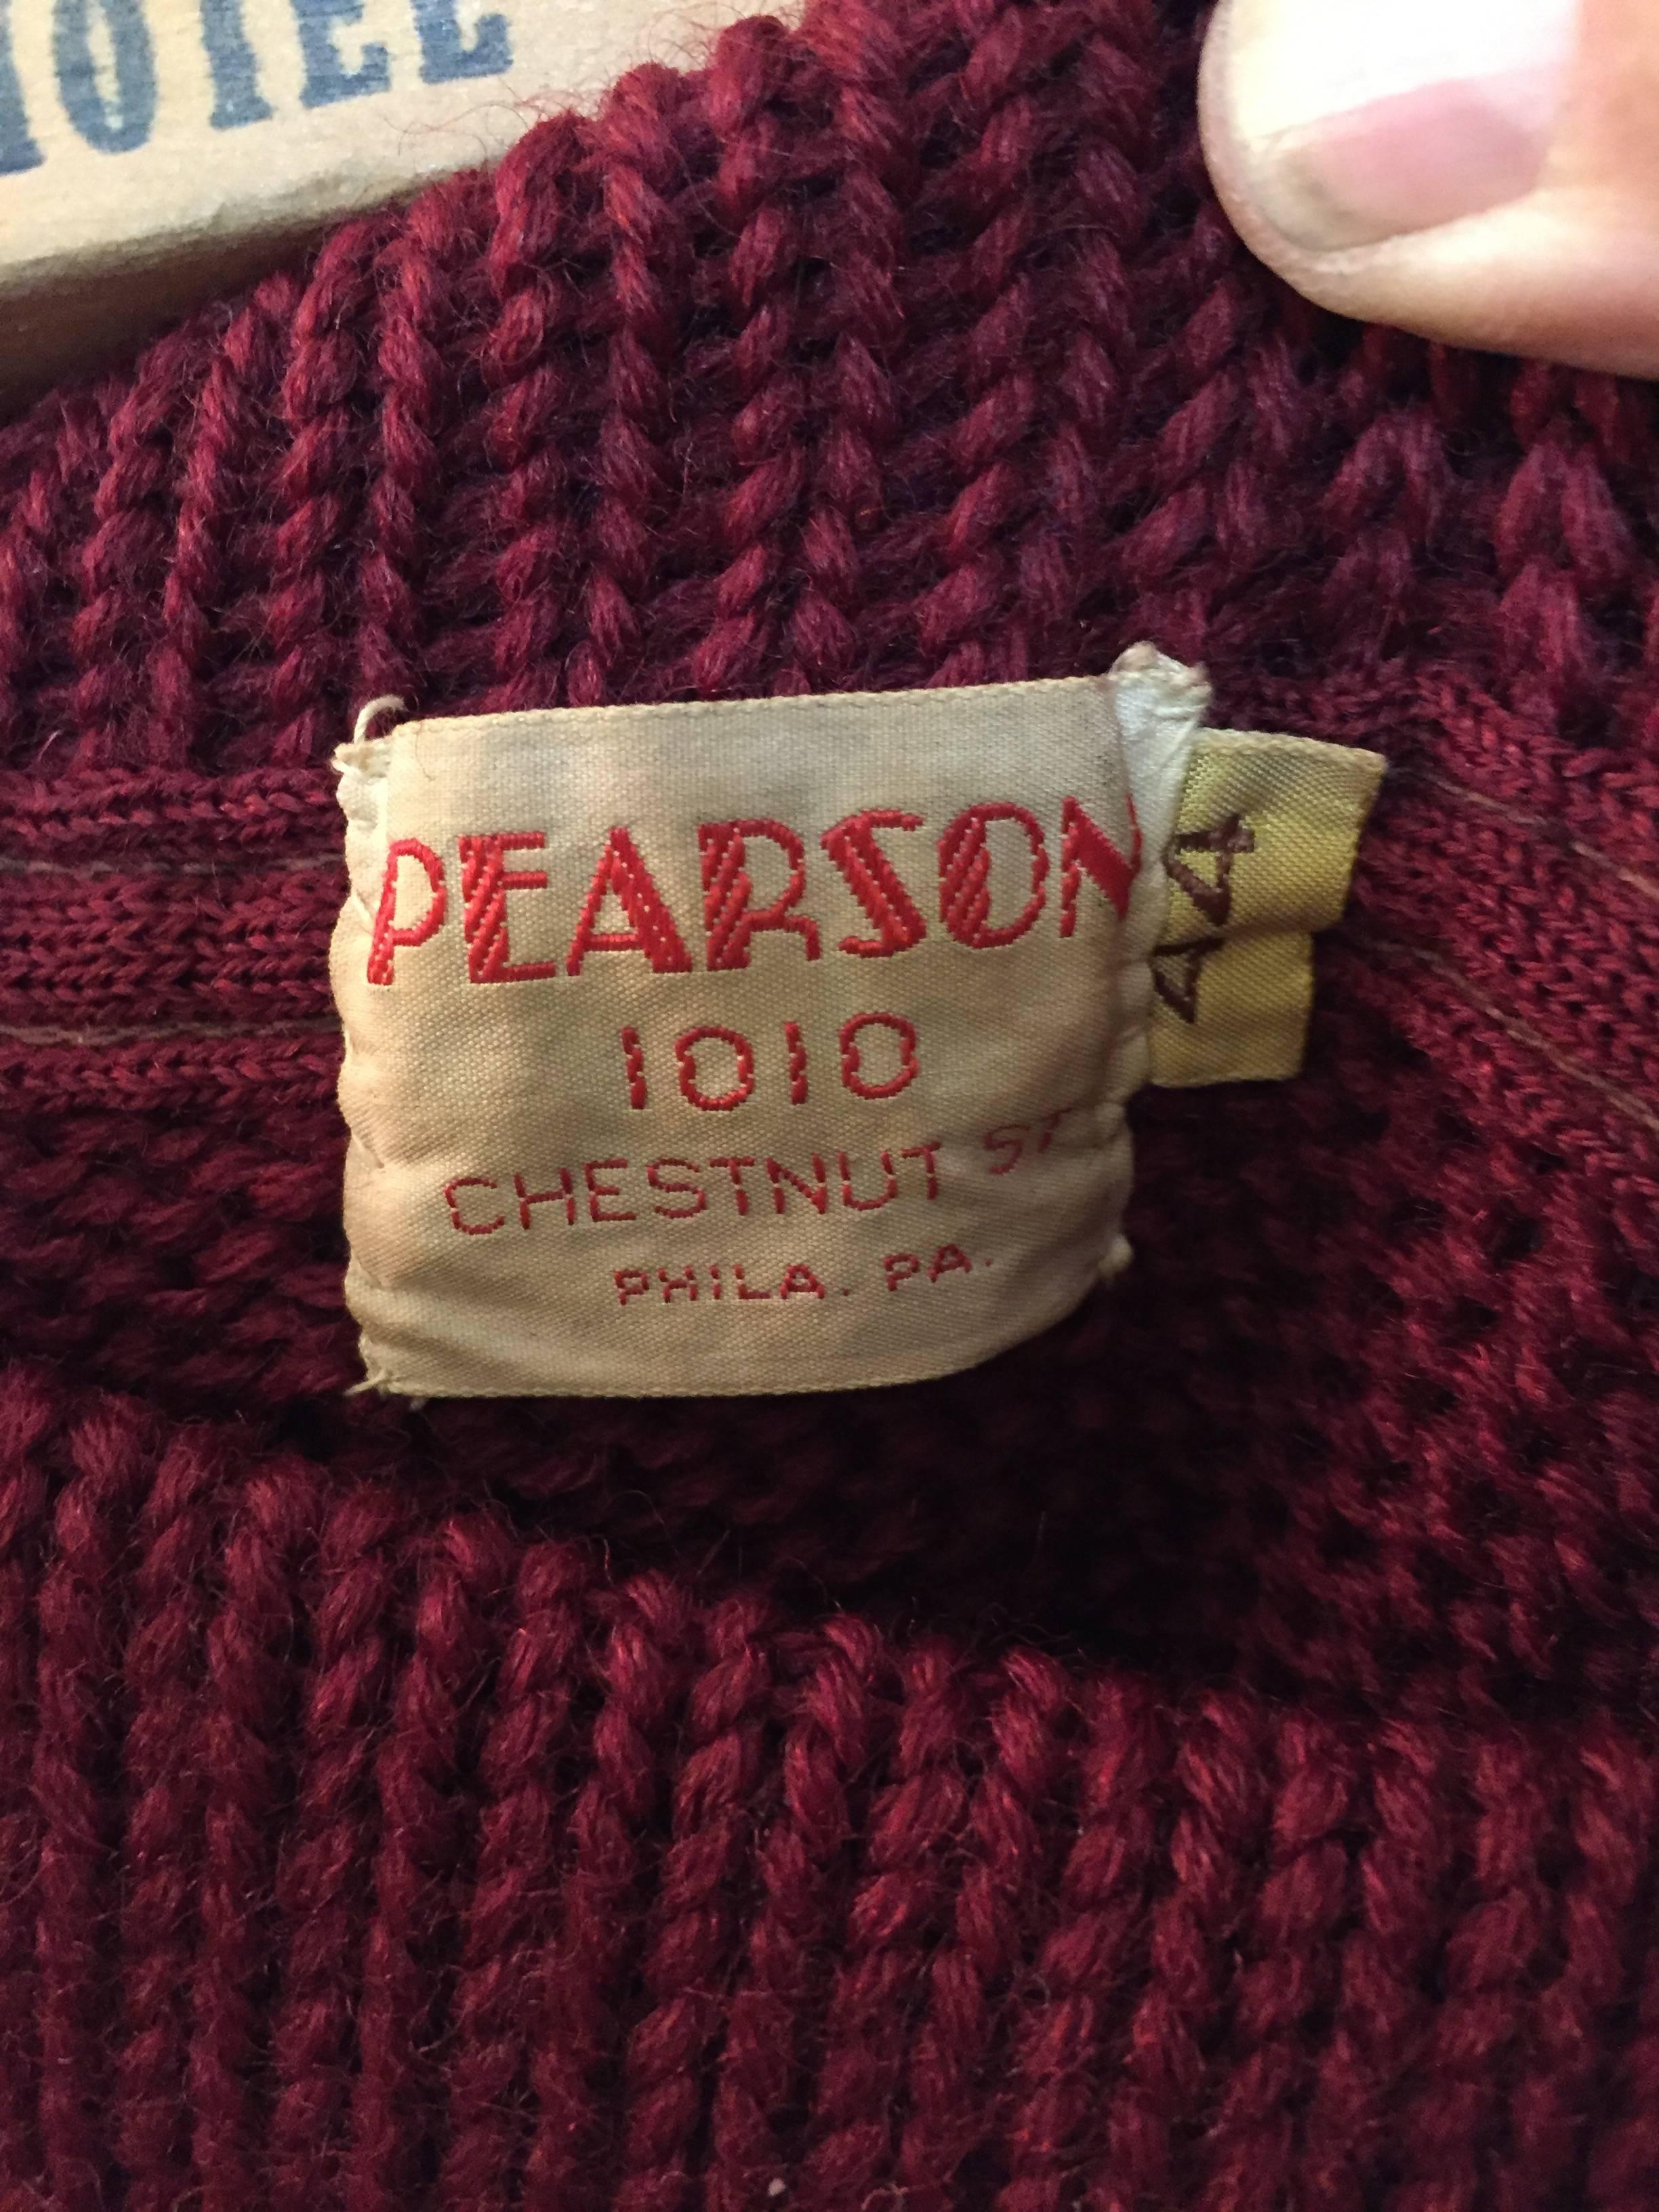 Fantastic wool herringbone weave letterman's sweater. Former alumnus who rode crew received his letterman's sweater, circa 1953-1954. Beautiful maroon sweater with a navy blue stitched on felt 'P'. 

The label reads Pearson, 1010, Chestnut St.,